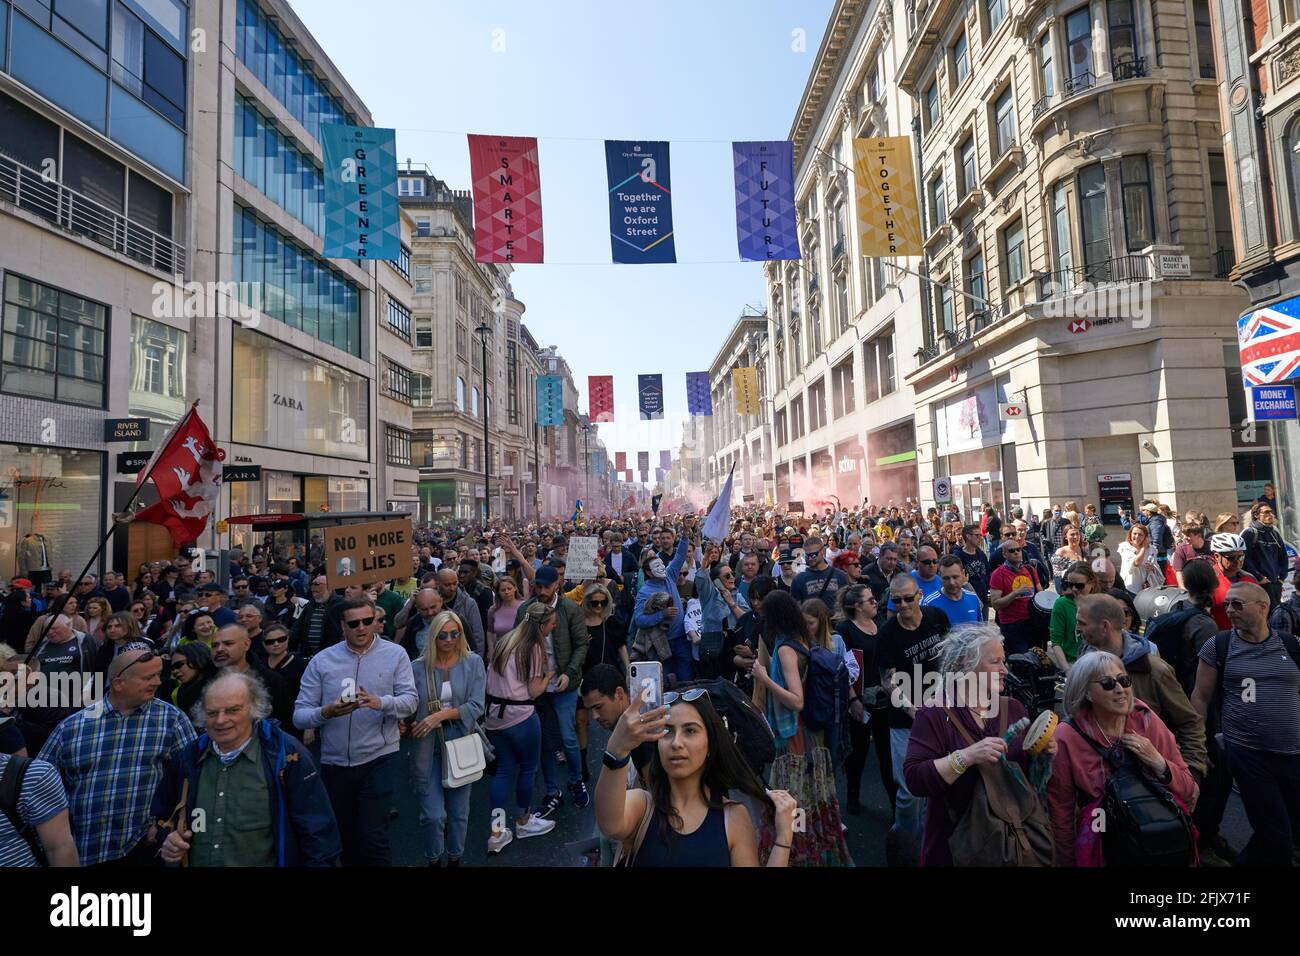 London, UK - 24 Apr 2021: A lady takes a selfie ahead of thousands of people that filled Oxford Street on a march calling for a lifting of all coronavirus restrictions. Stock Photo